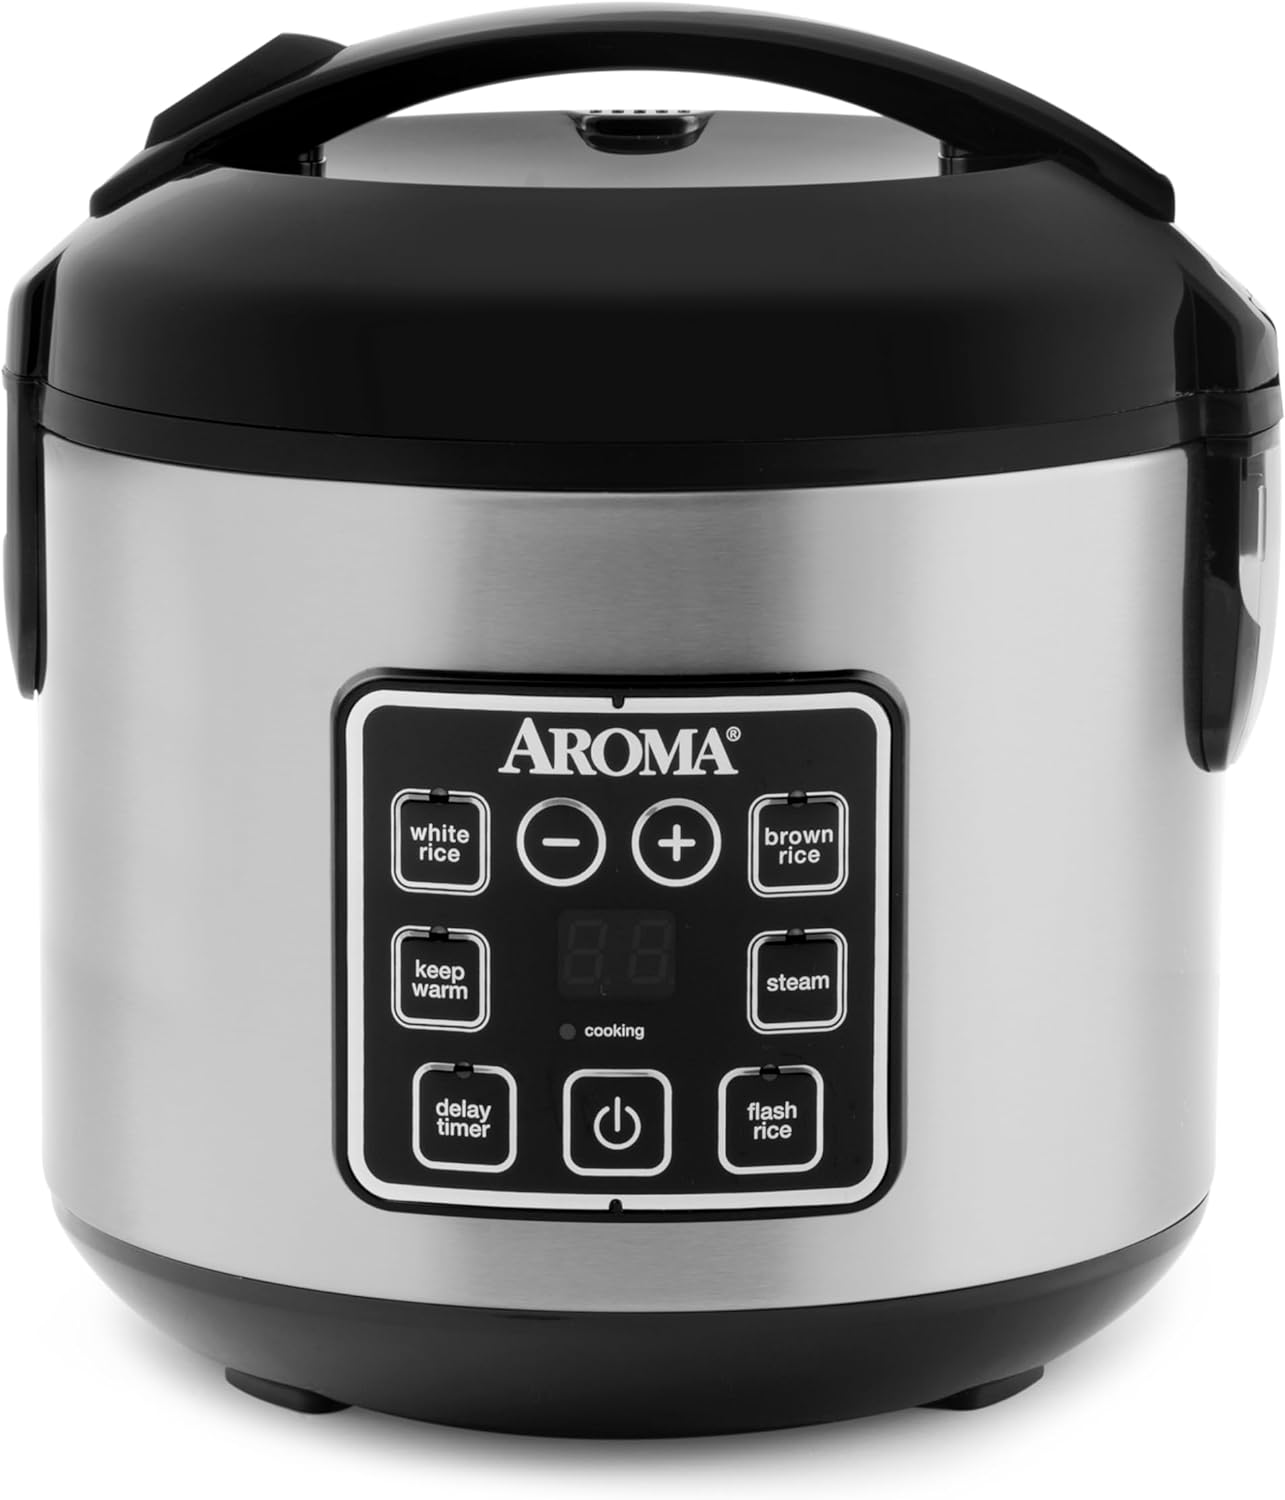 AROMA Digital Rice Cooker, 4-Cup (Uncooked) : 8-Cup (Cooked), Steamer, Grain Cooker, Multicooker, 2 Qt, Stainless Steel Exterior